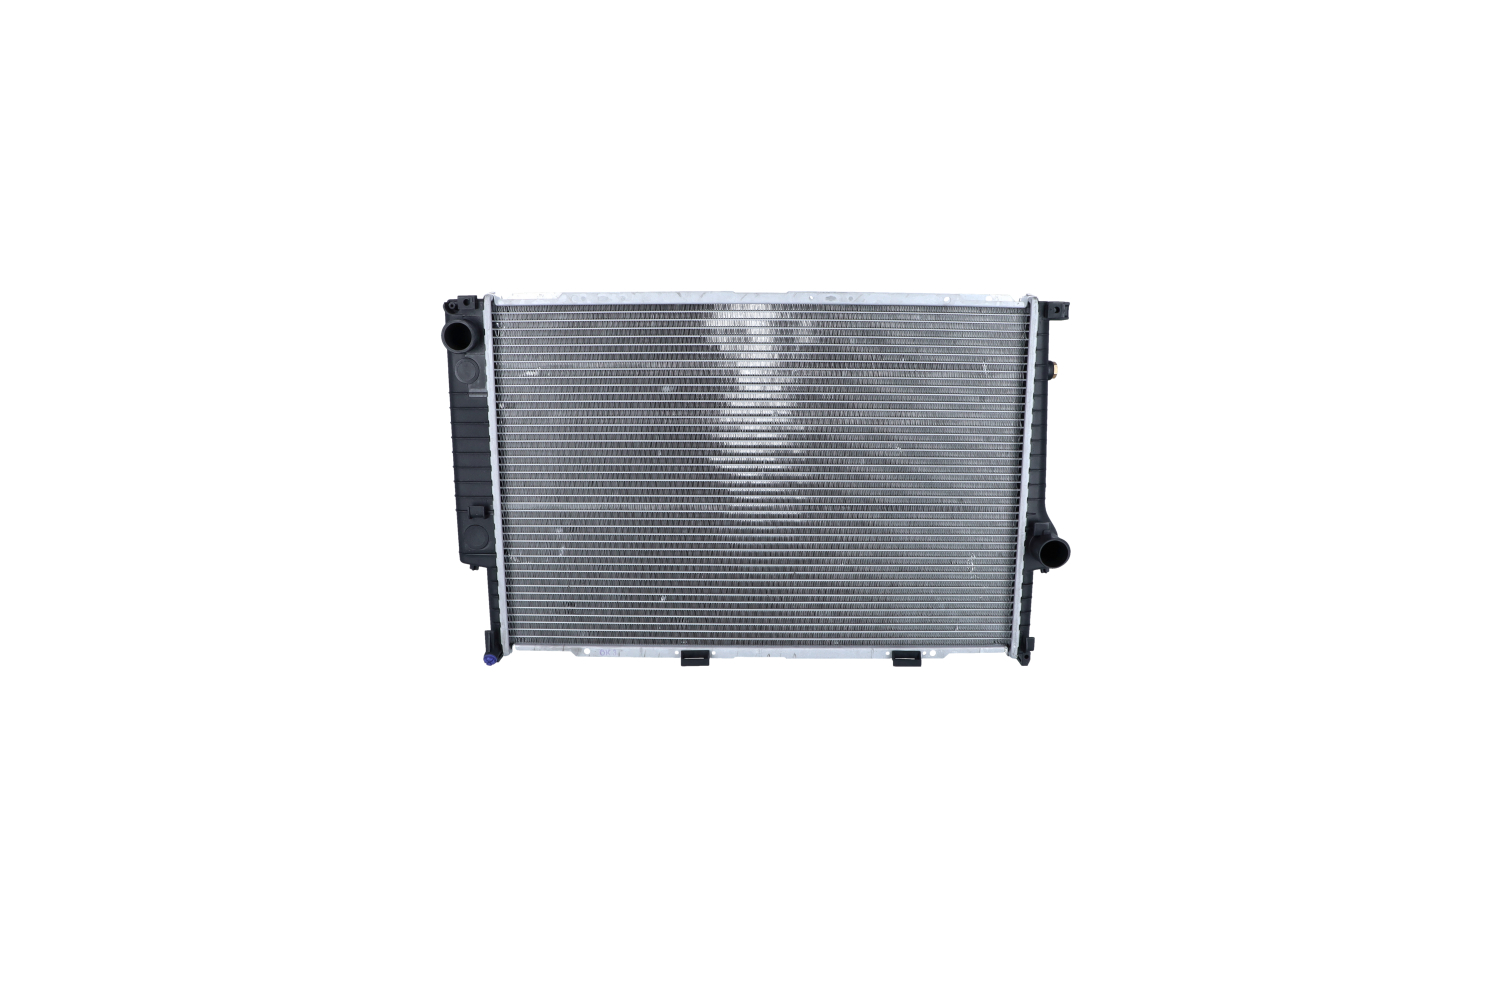 NRF EASY FIT Aluminium, 650 x 435 x 34 mm, with piston clip, Brazed cooling fins Radiator 509588 buy